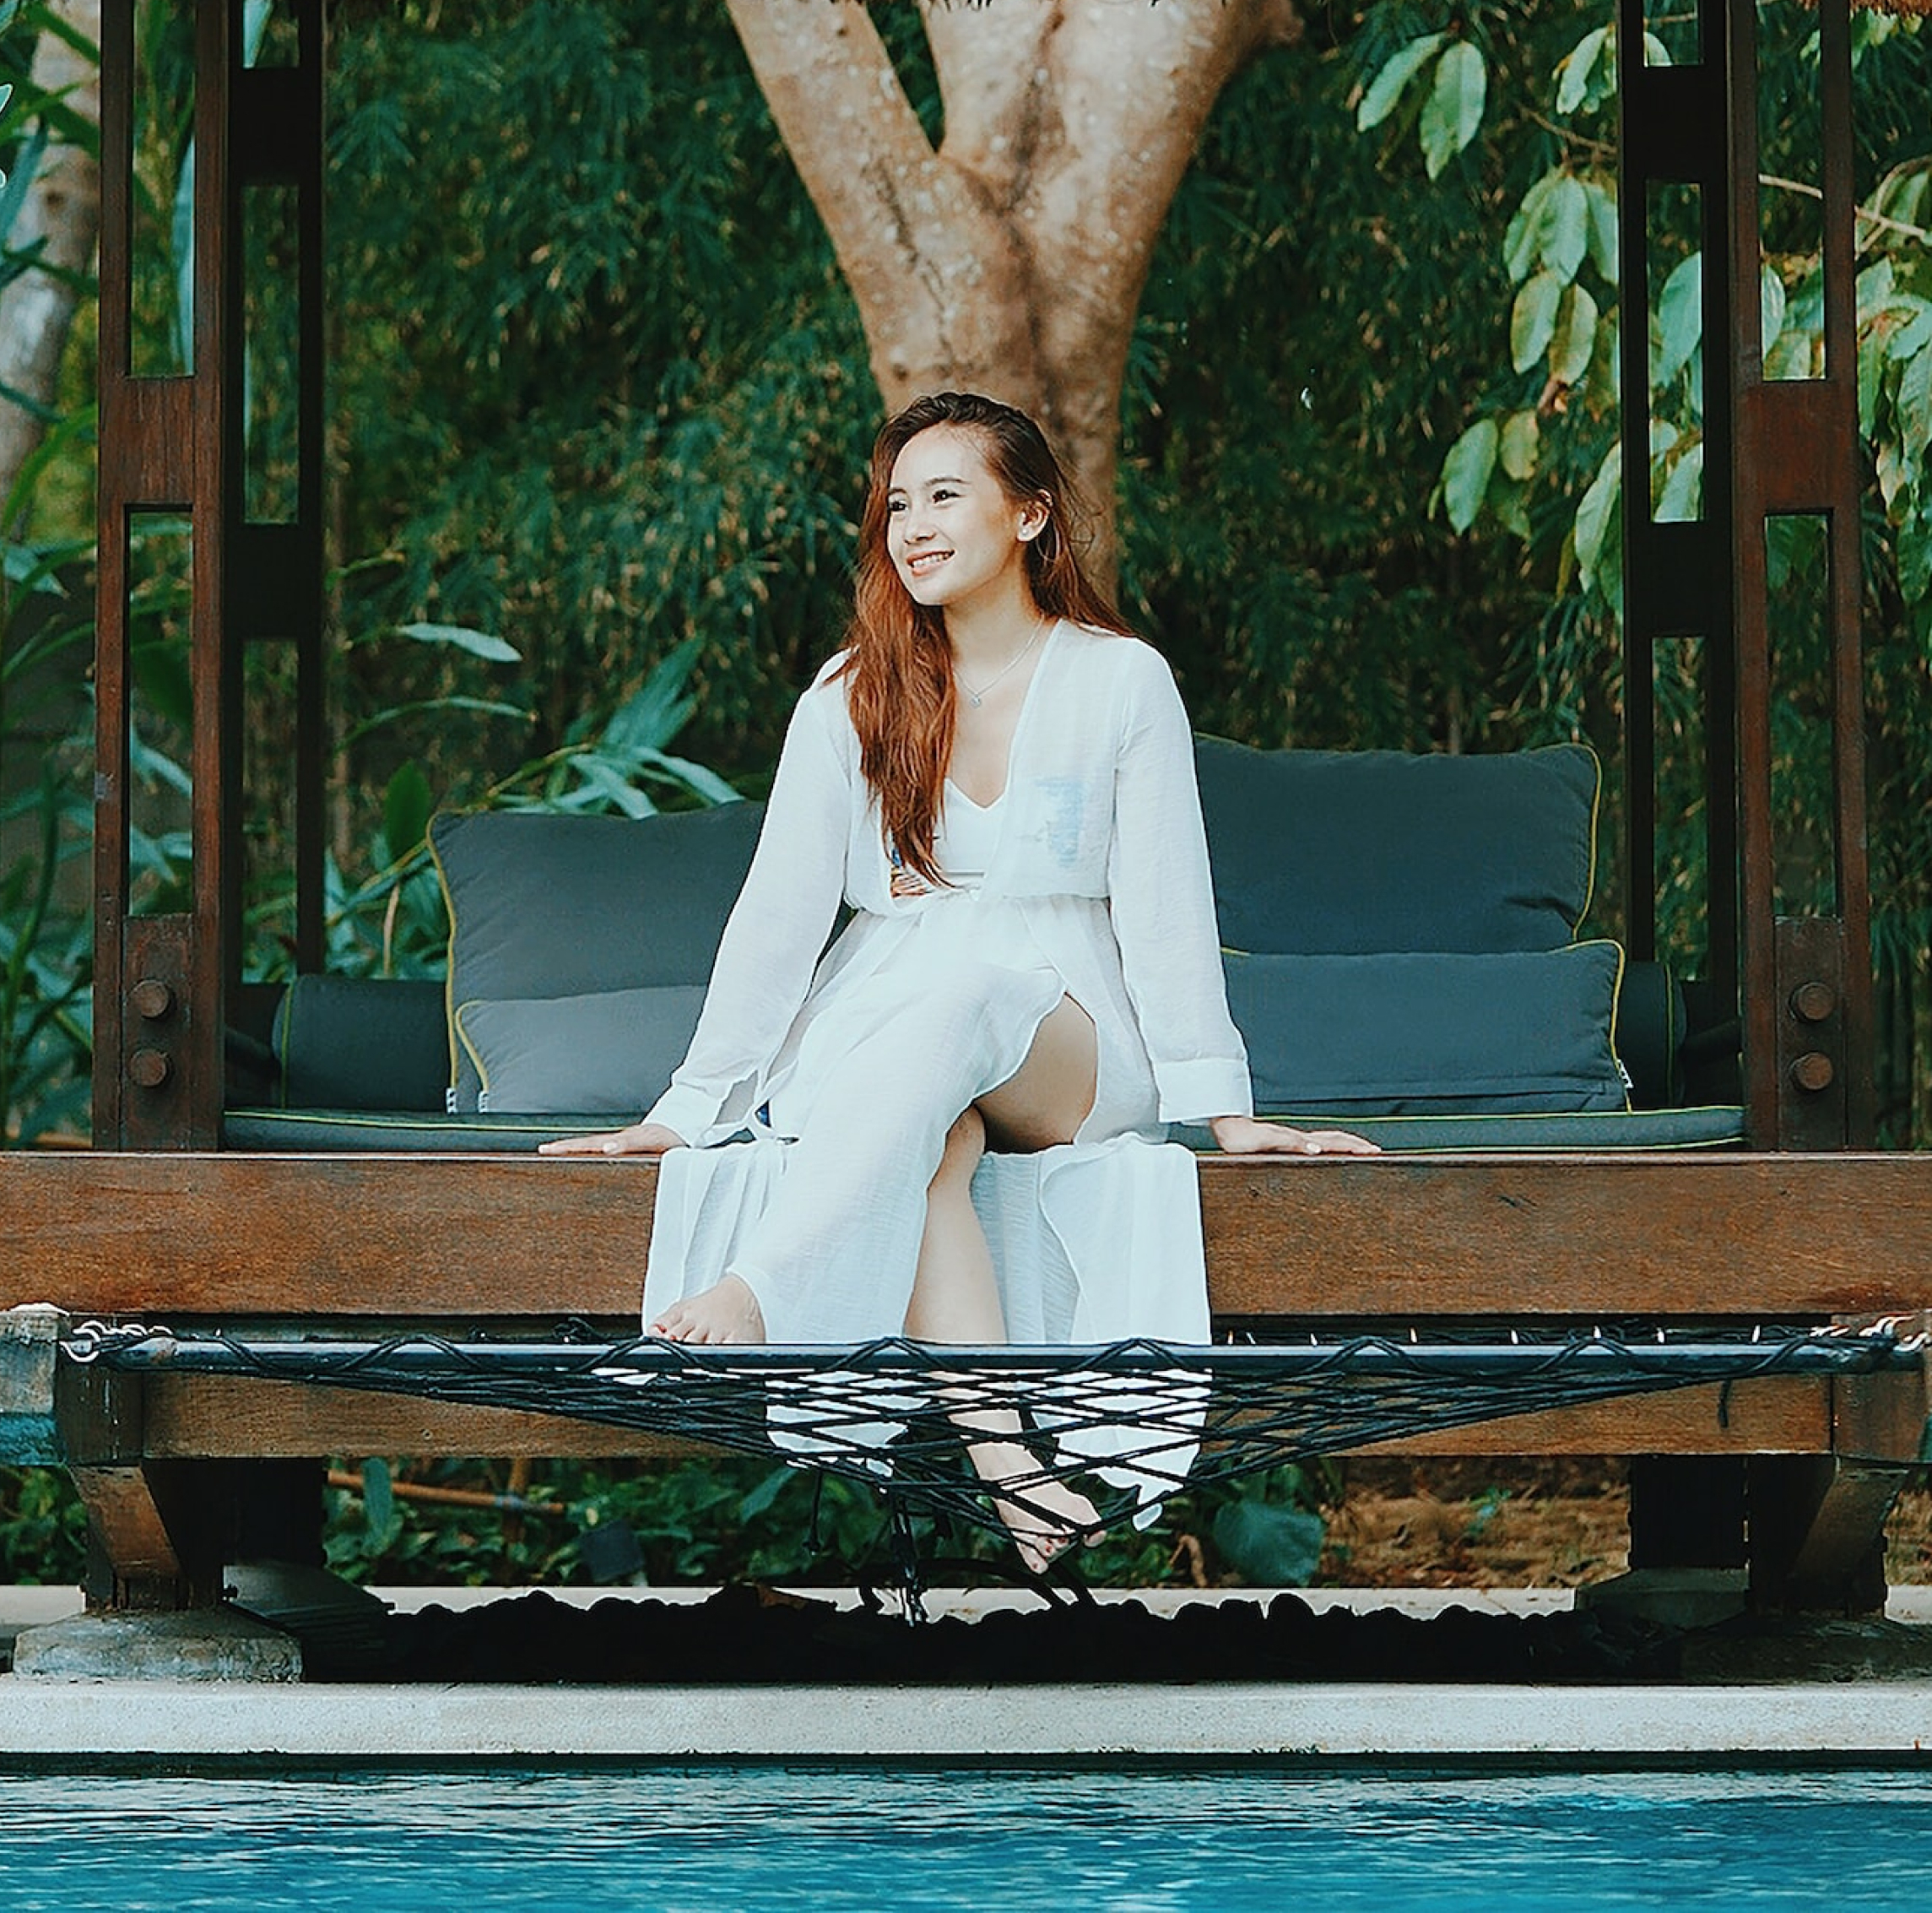 a member of a hospitality digital marketing agency with long brown and curly hair is sitting by the pool of a resort or hotel in bali wearing white pants, shirt, and cardigan